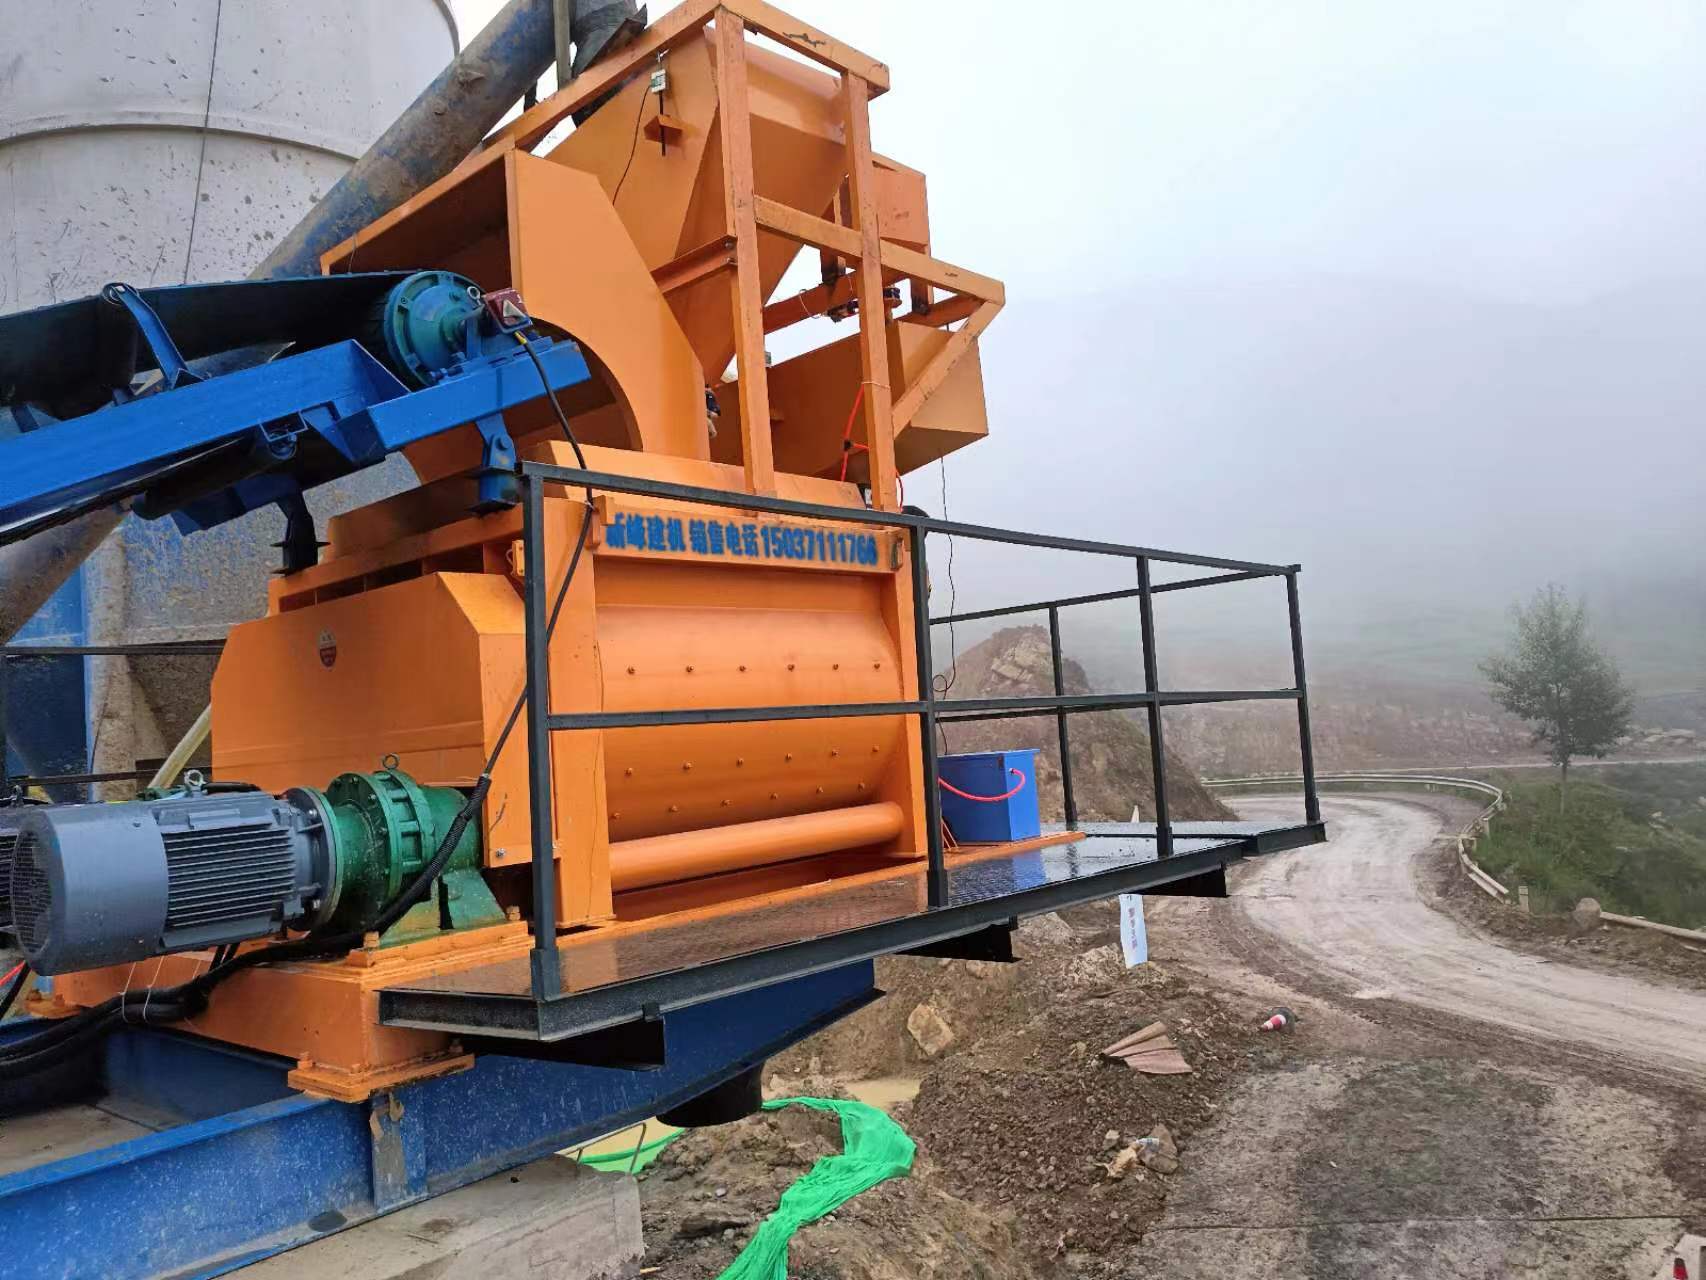 What is the role of weighing system in concrete mixing equipment?